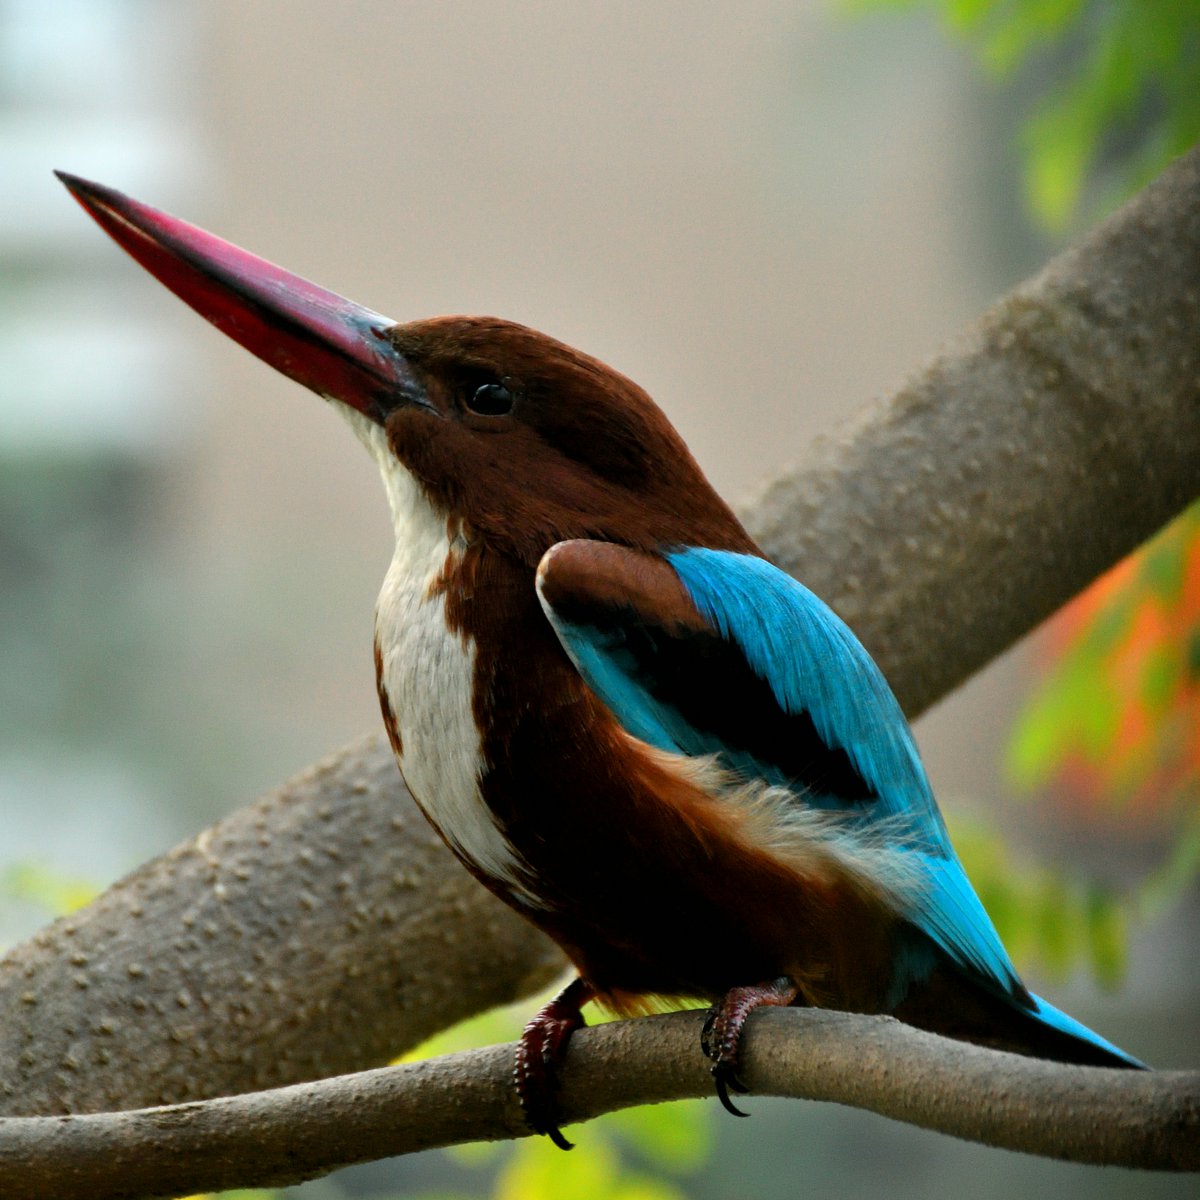 Look at this beautiful white-throated kingfisher perched on a branch! Its sharp beak is perfectly adapted for catching fish   #birdwatching #naturephotography #MondayMorning